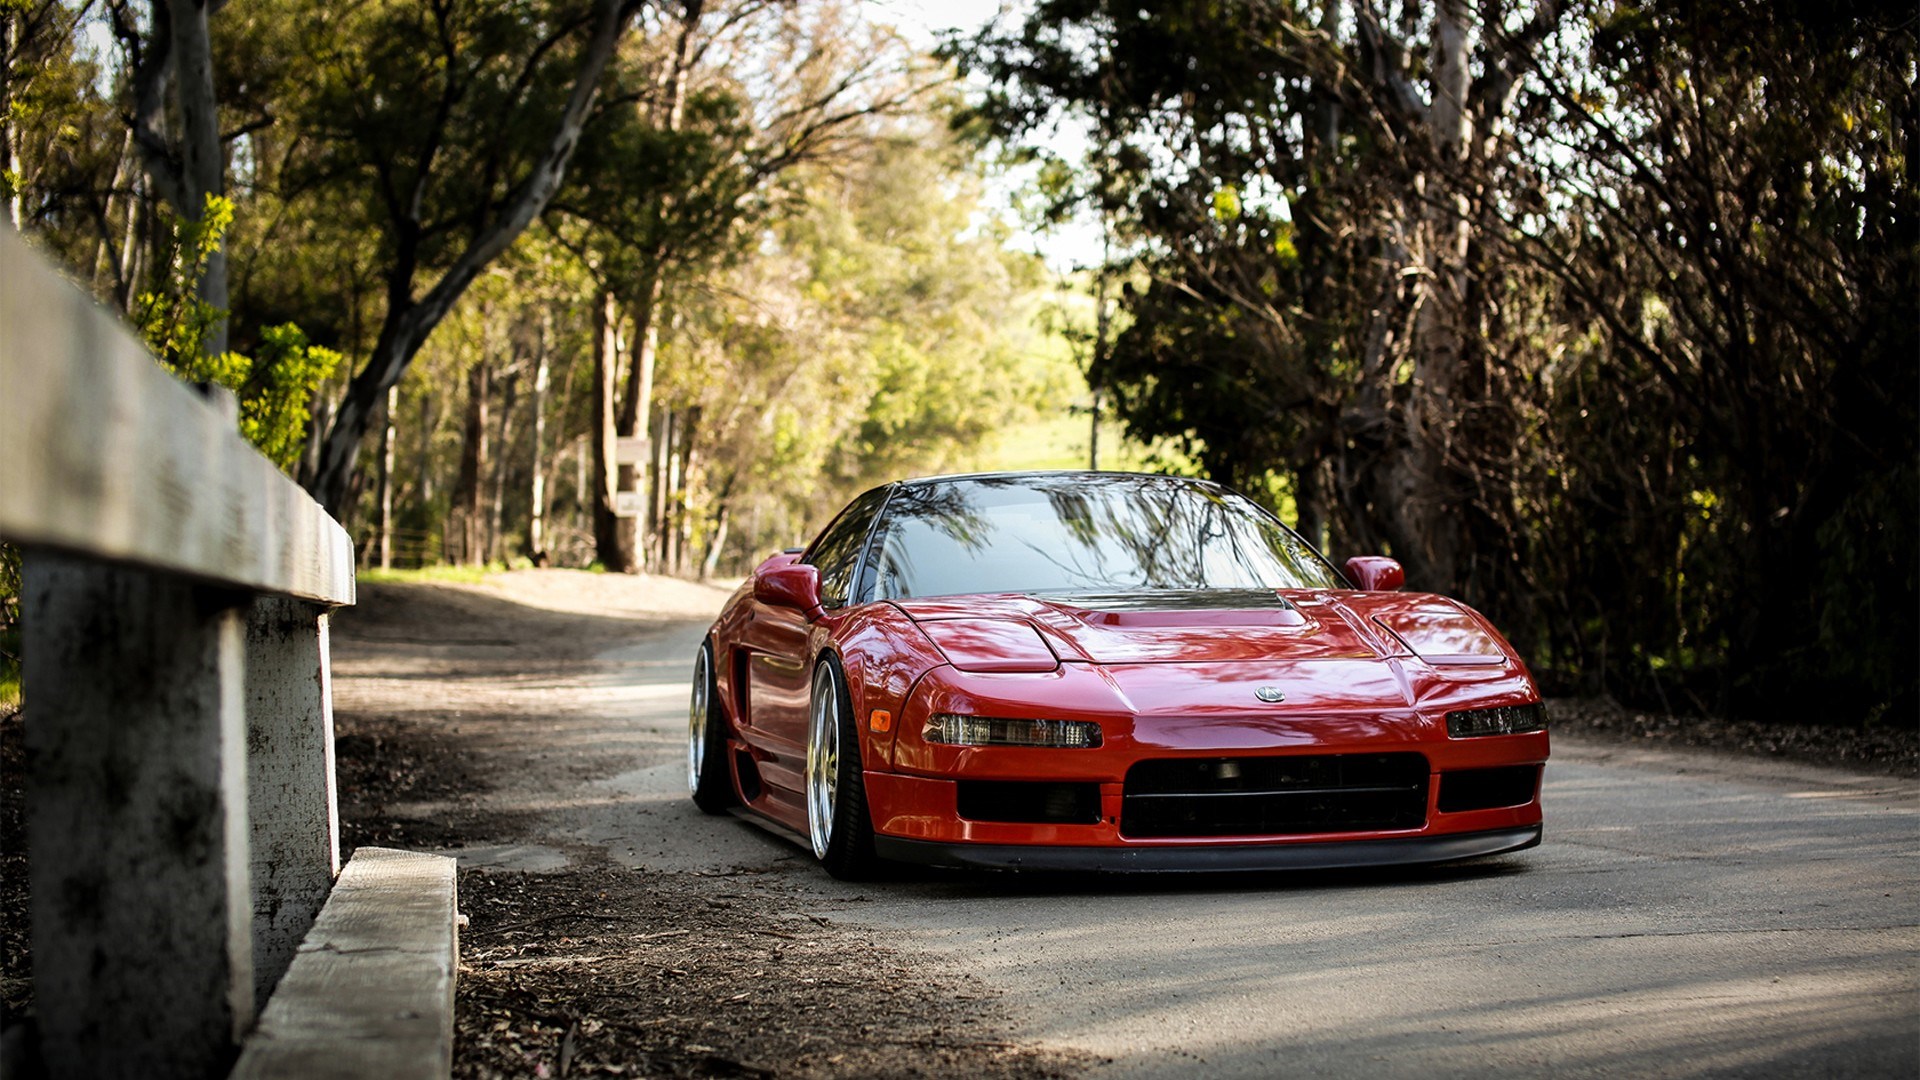 Top Hqfx Acura Nsx Image Best Collection